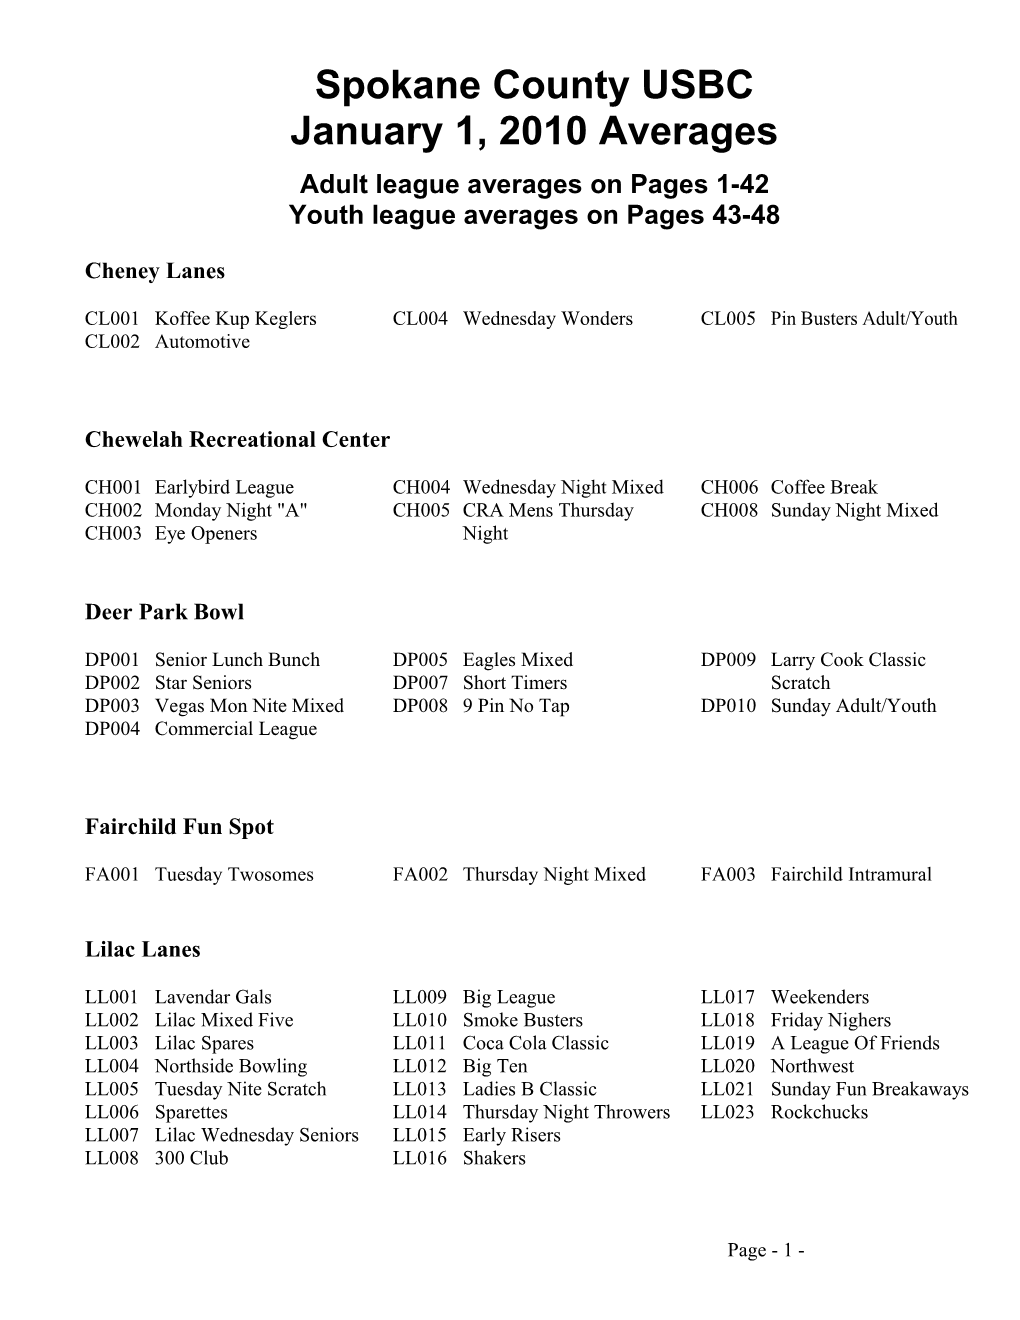 Adult League Averages on Pages 1-42